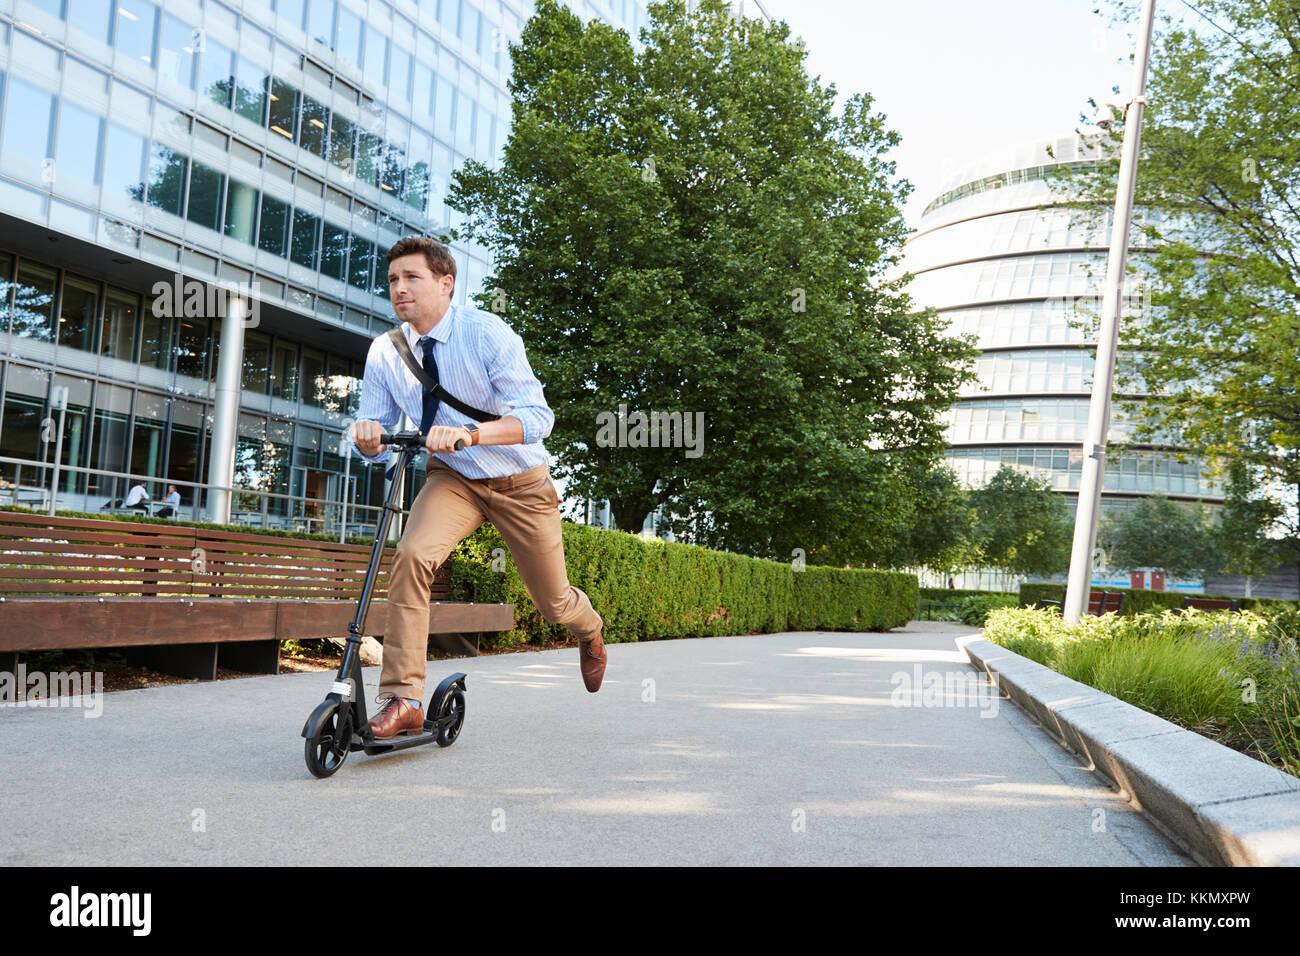 Young Businessman Commuting To Work Through City On Scooter Stock Photo